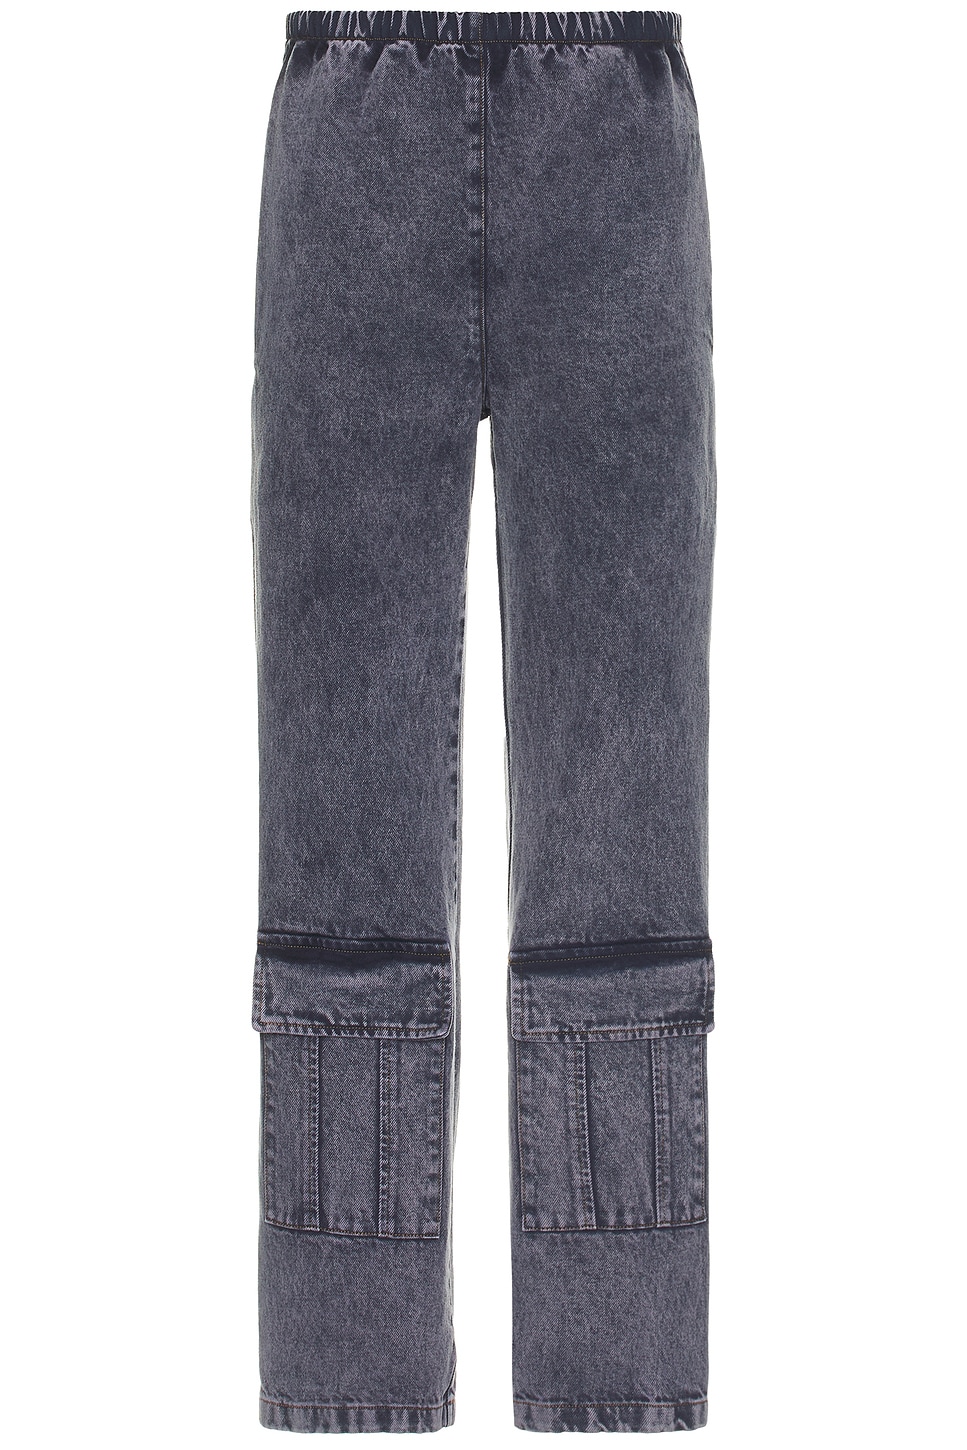 Image 1 of Liberal Youth Ministry Calvin Denim Pants in Polar Blue